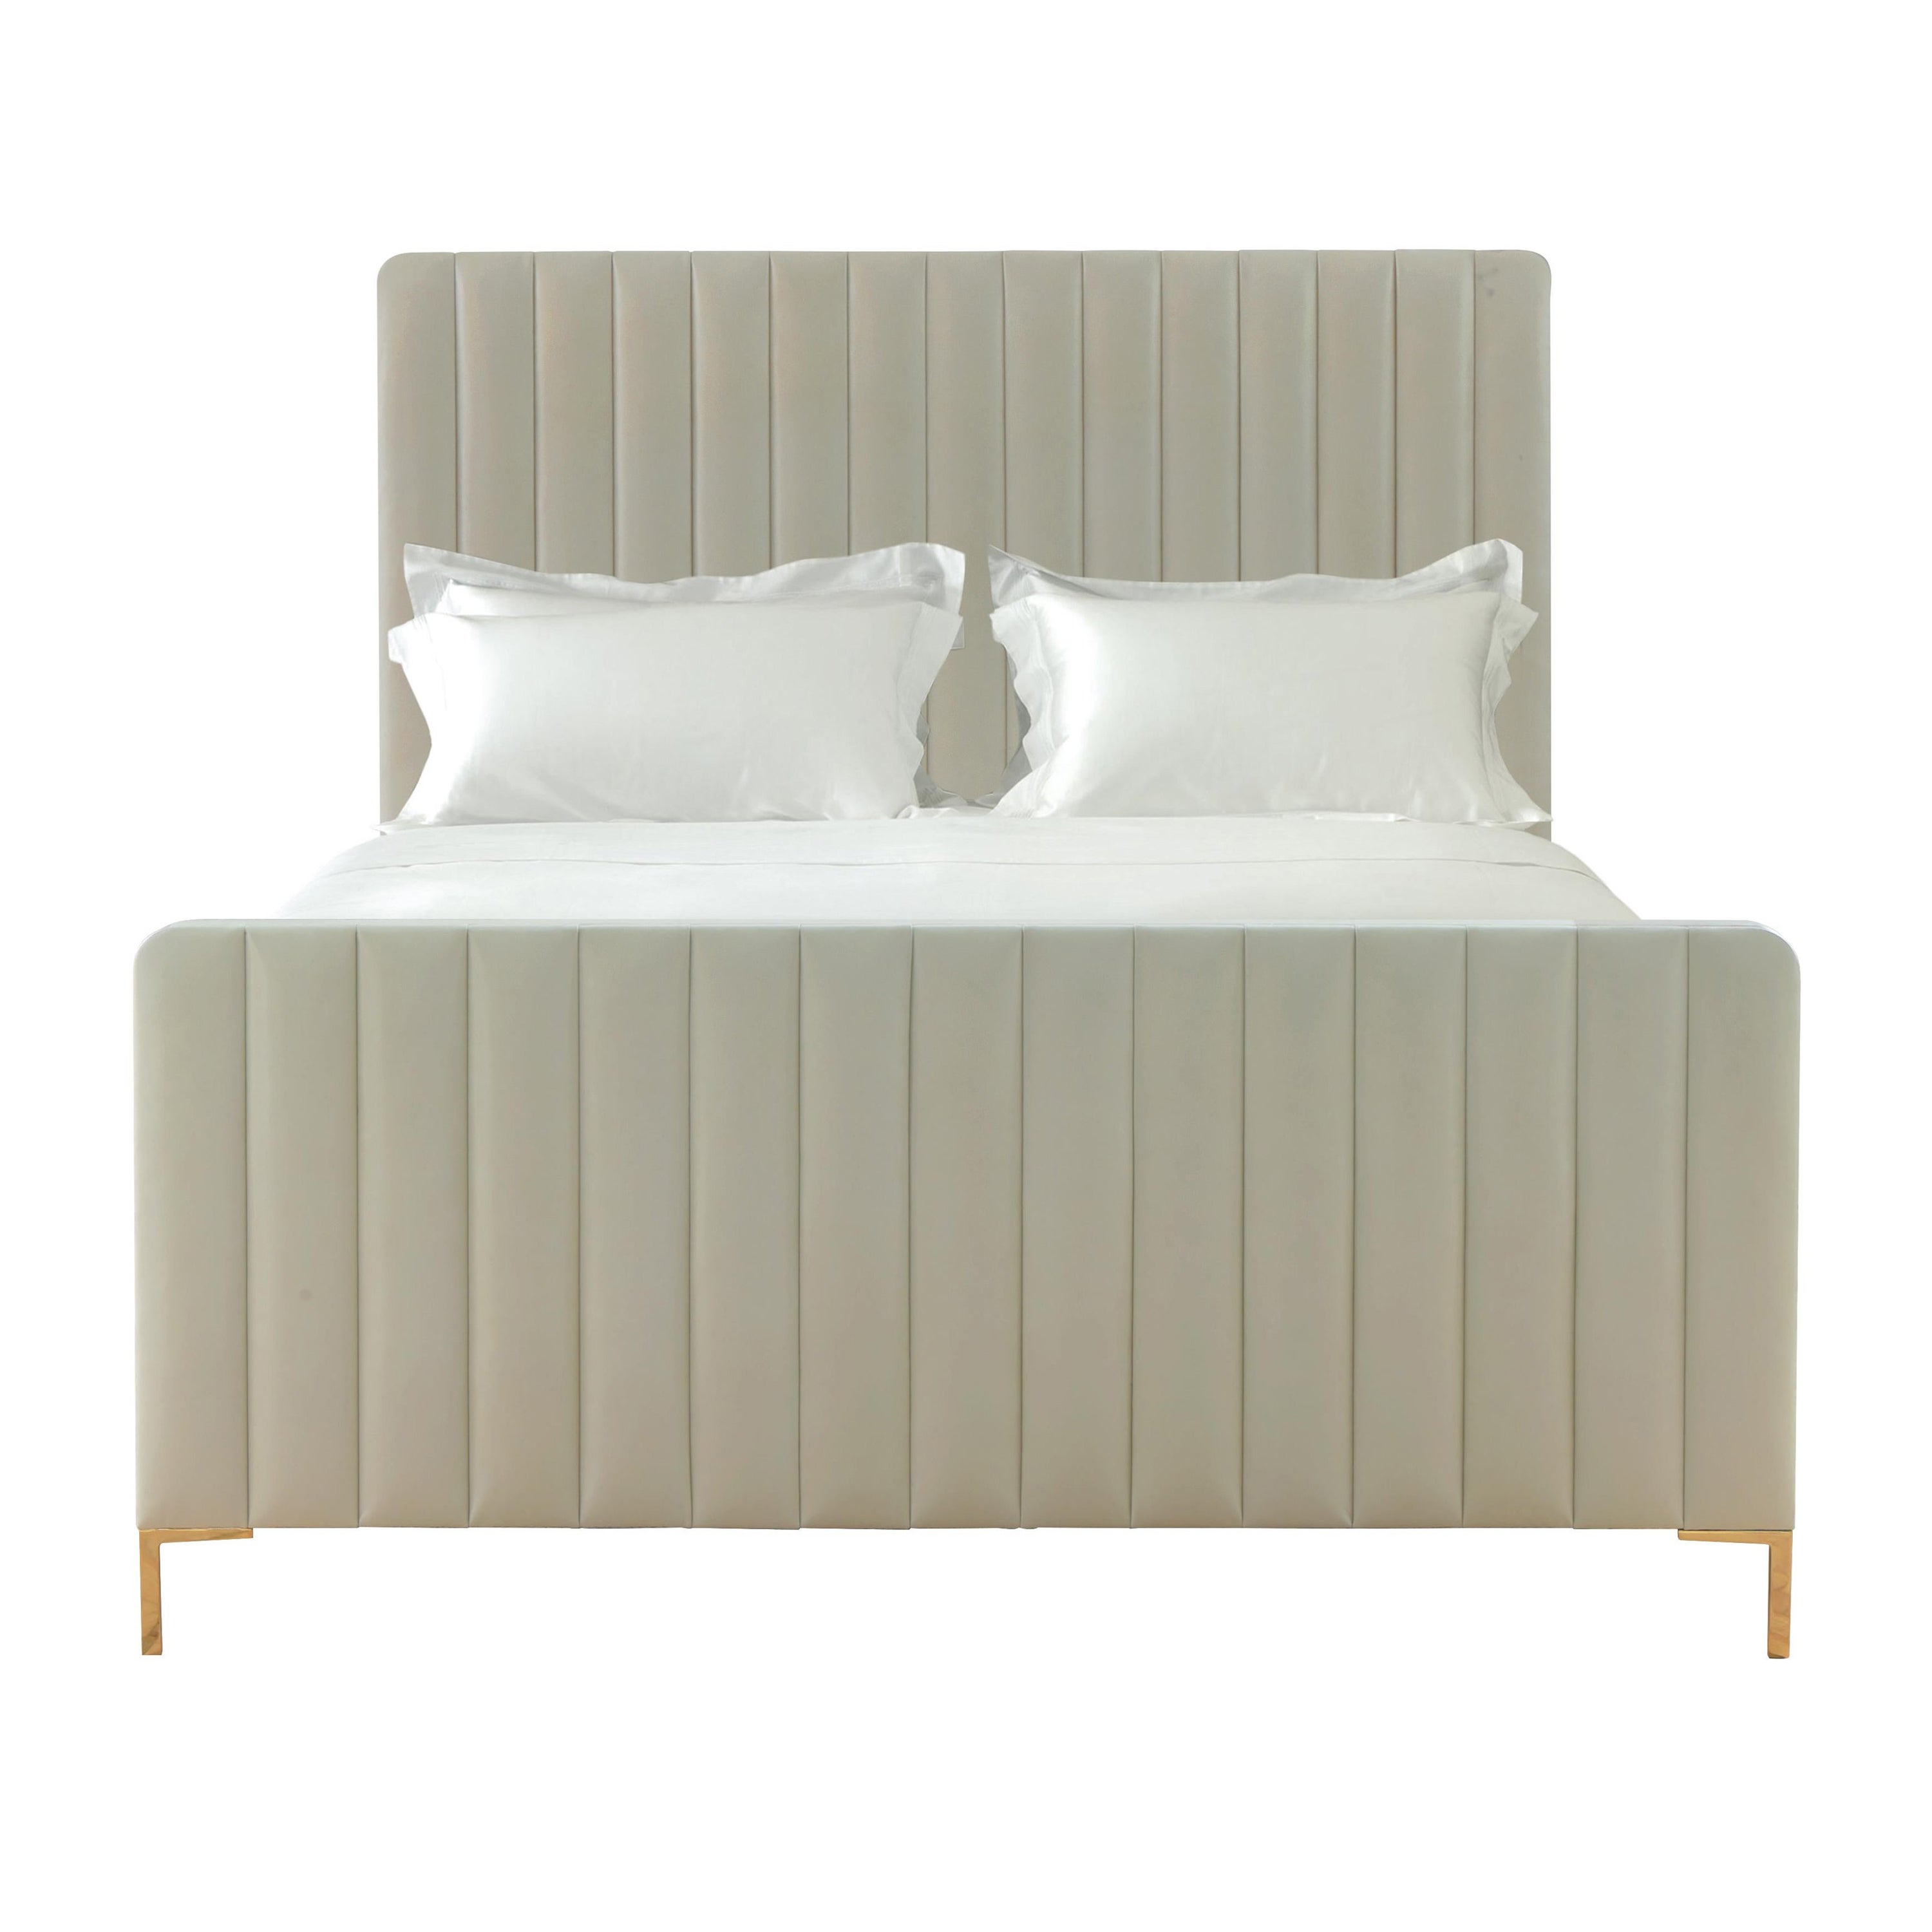 Bespoke Savoir Chrissy and Nº1 Bed Set, Handmade in London, Eastern King  Size For Sale at 1stDibs | bespoke king size beds